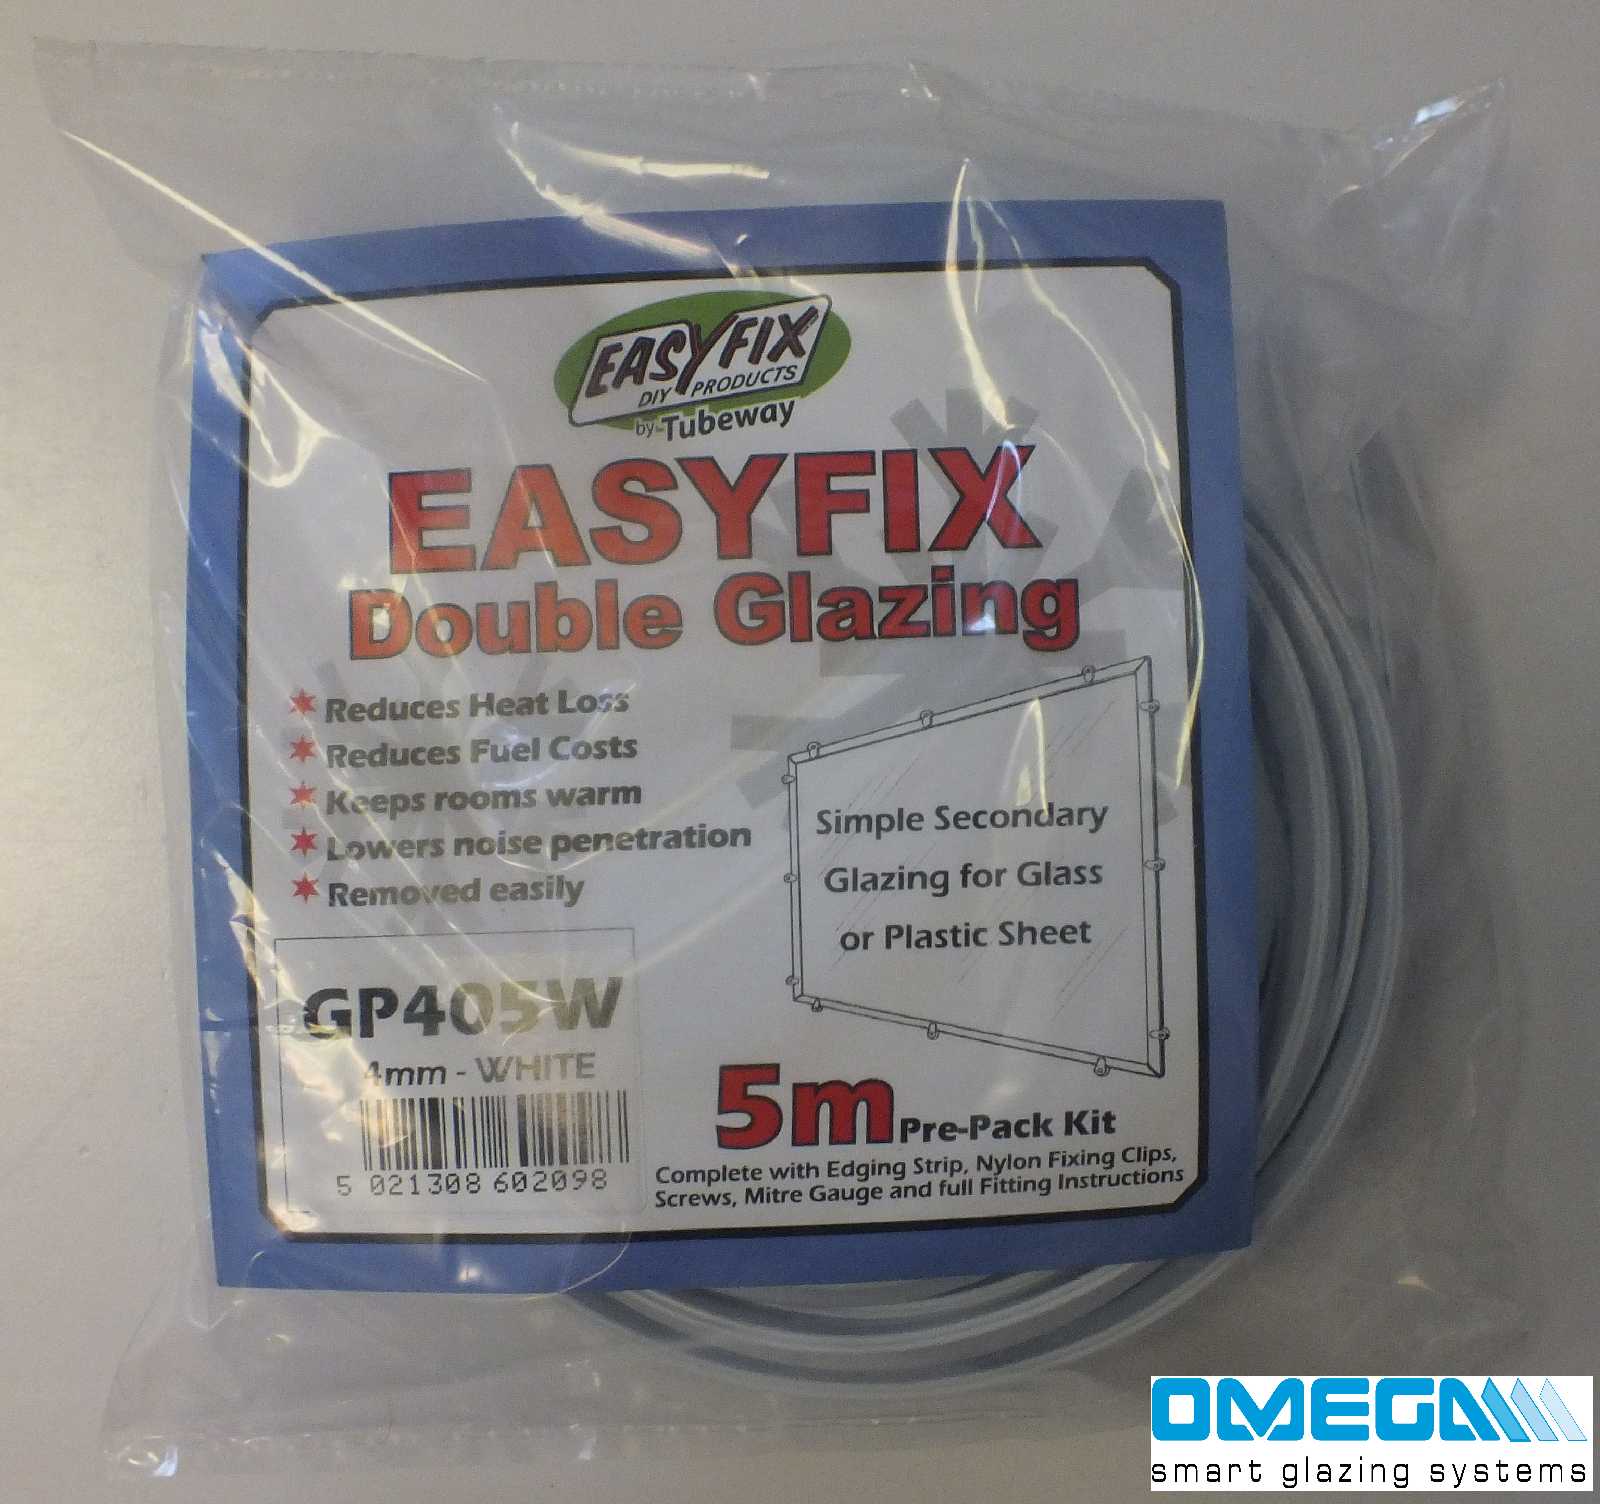 Easyfix Clipglaze Edging Kit - 5m roll of edging for 2mm Glazing Thickness,White, Clear or Brown